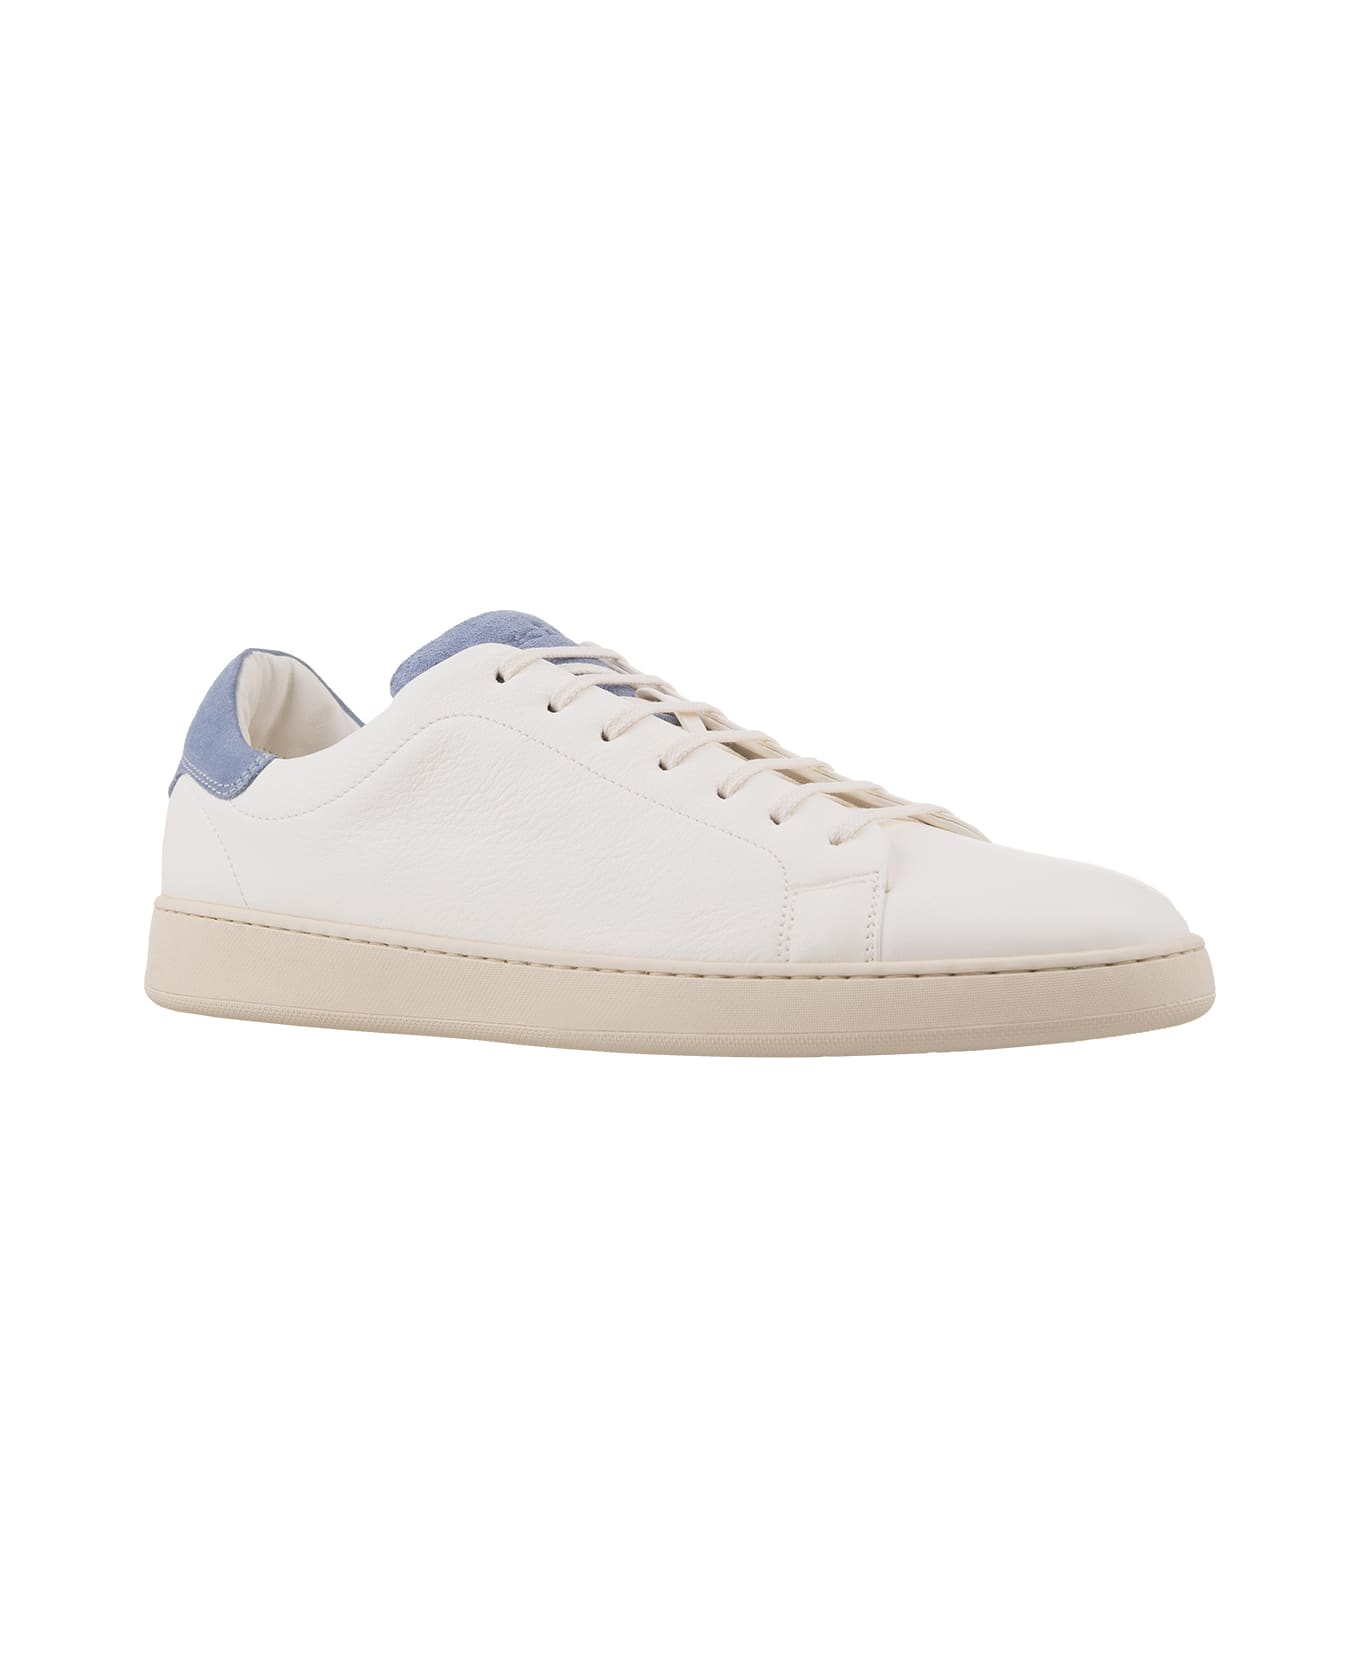 Kiton White Leather Sneakers With Light Blue Details - Blue